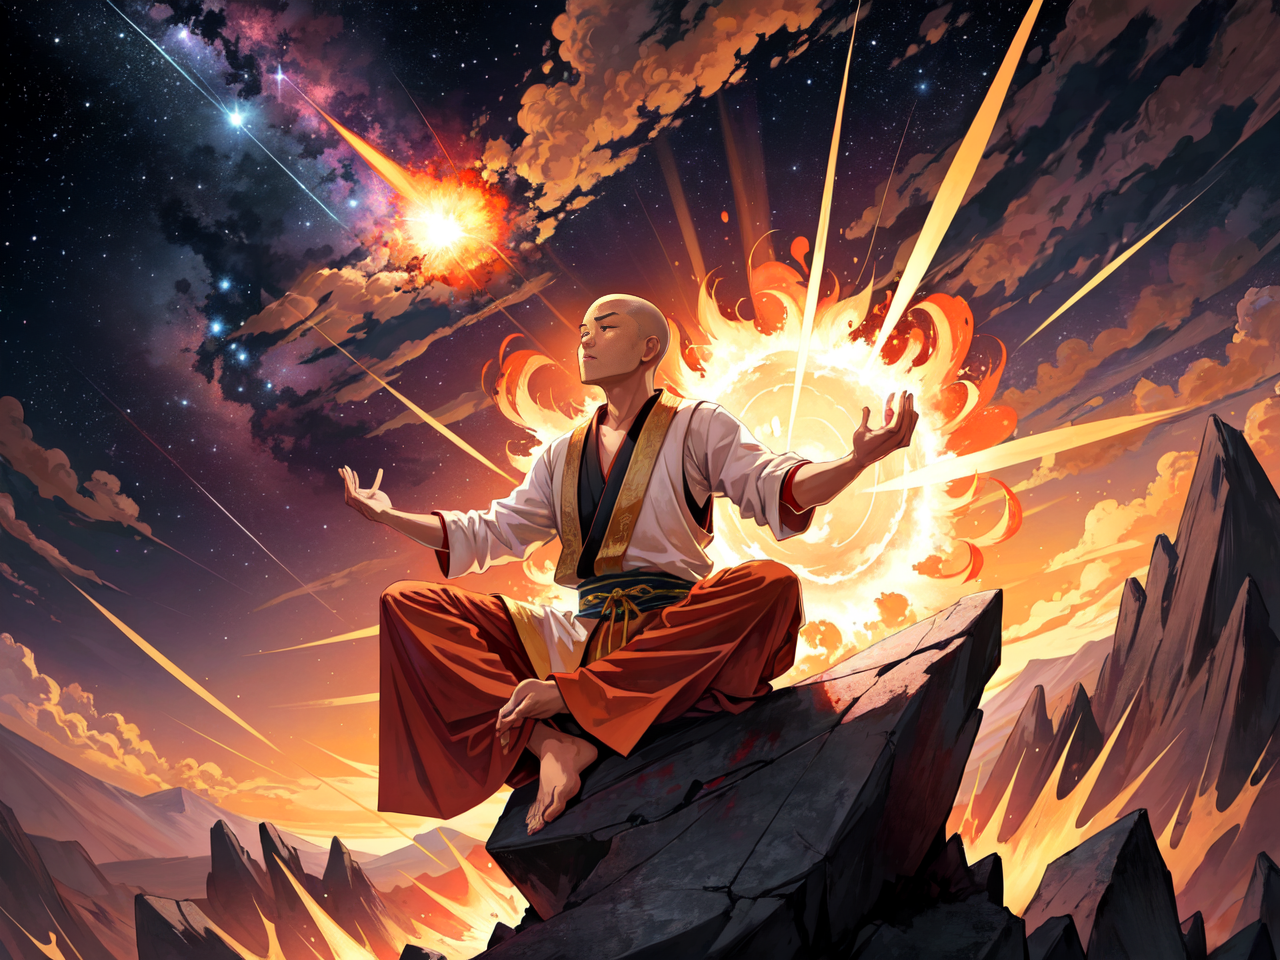 A Shaolin Monk meditates at the base of a mountain, the sky a blood-red hue. Suddenly, a meteor falls from the heavens and...